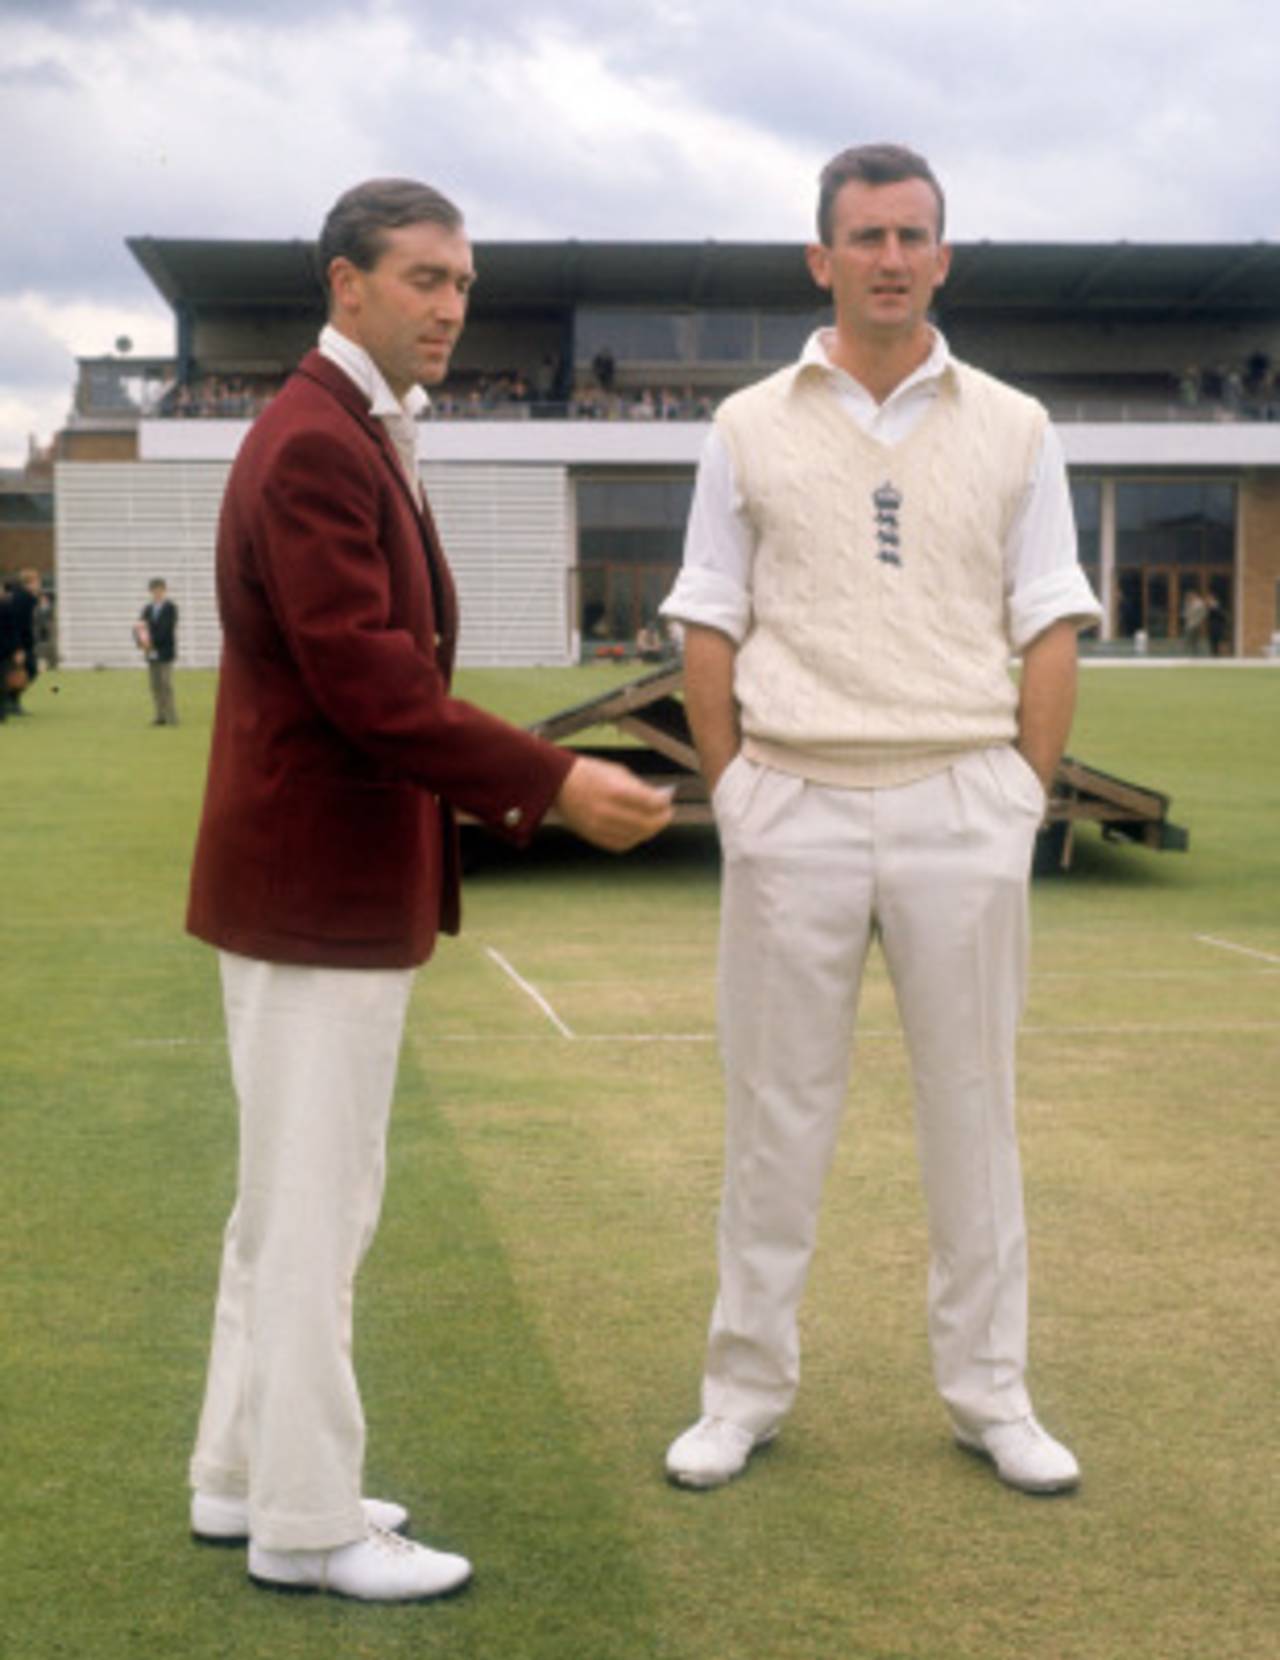 Keith Andrew and Ted Dexter prepare to toss before a county match in 1962&nbsp;&nbsp;&bull;&nbsp;&nbsp;PA Photos